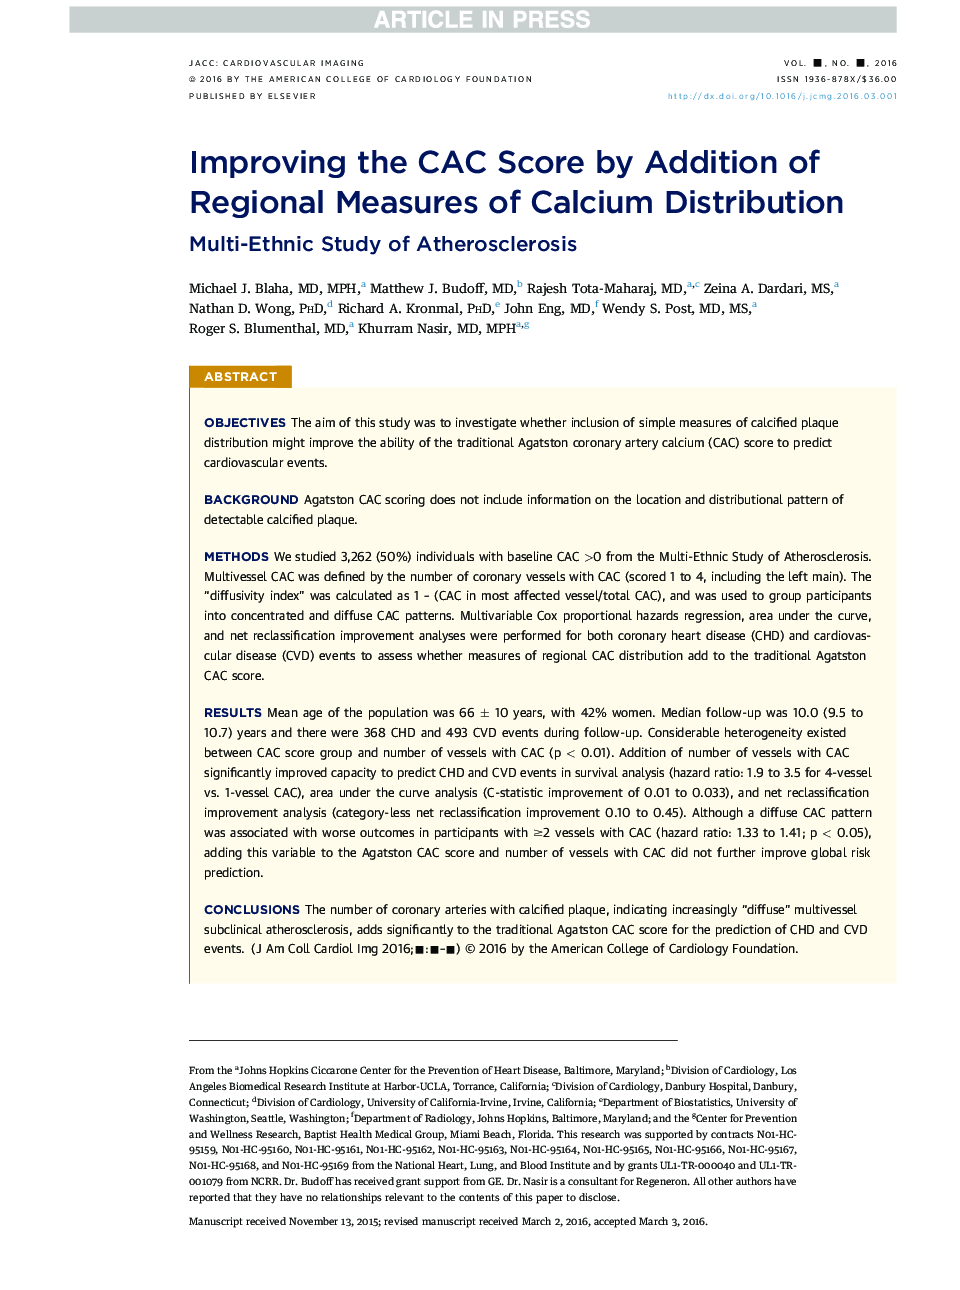 Improving the CAC Score by Addition of Regional Measures of Calcium Distribution